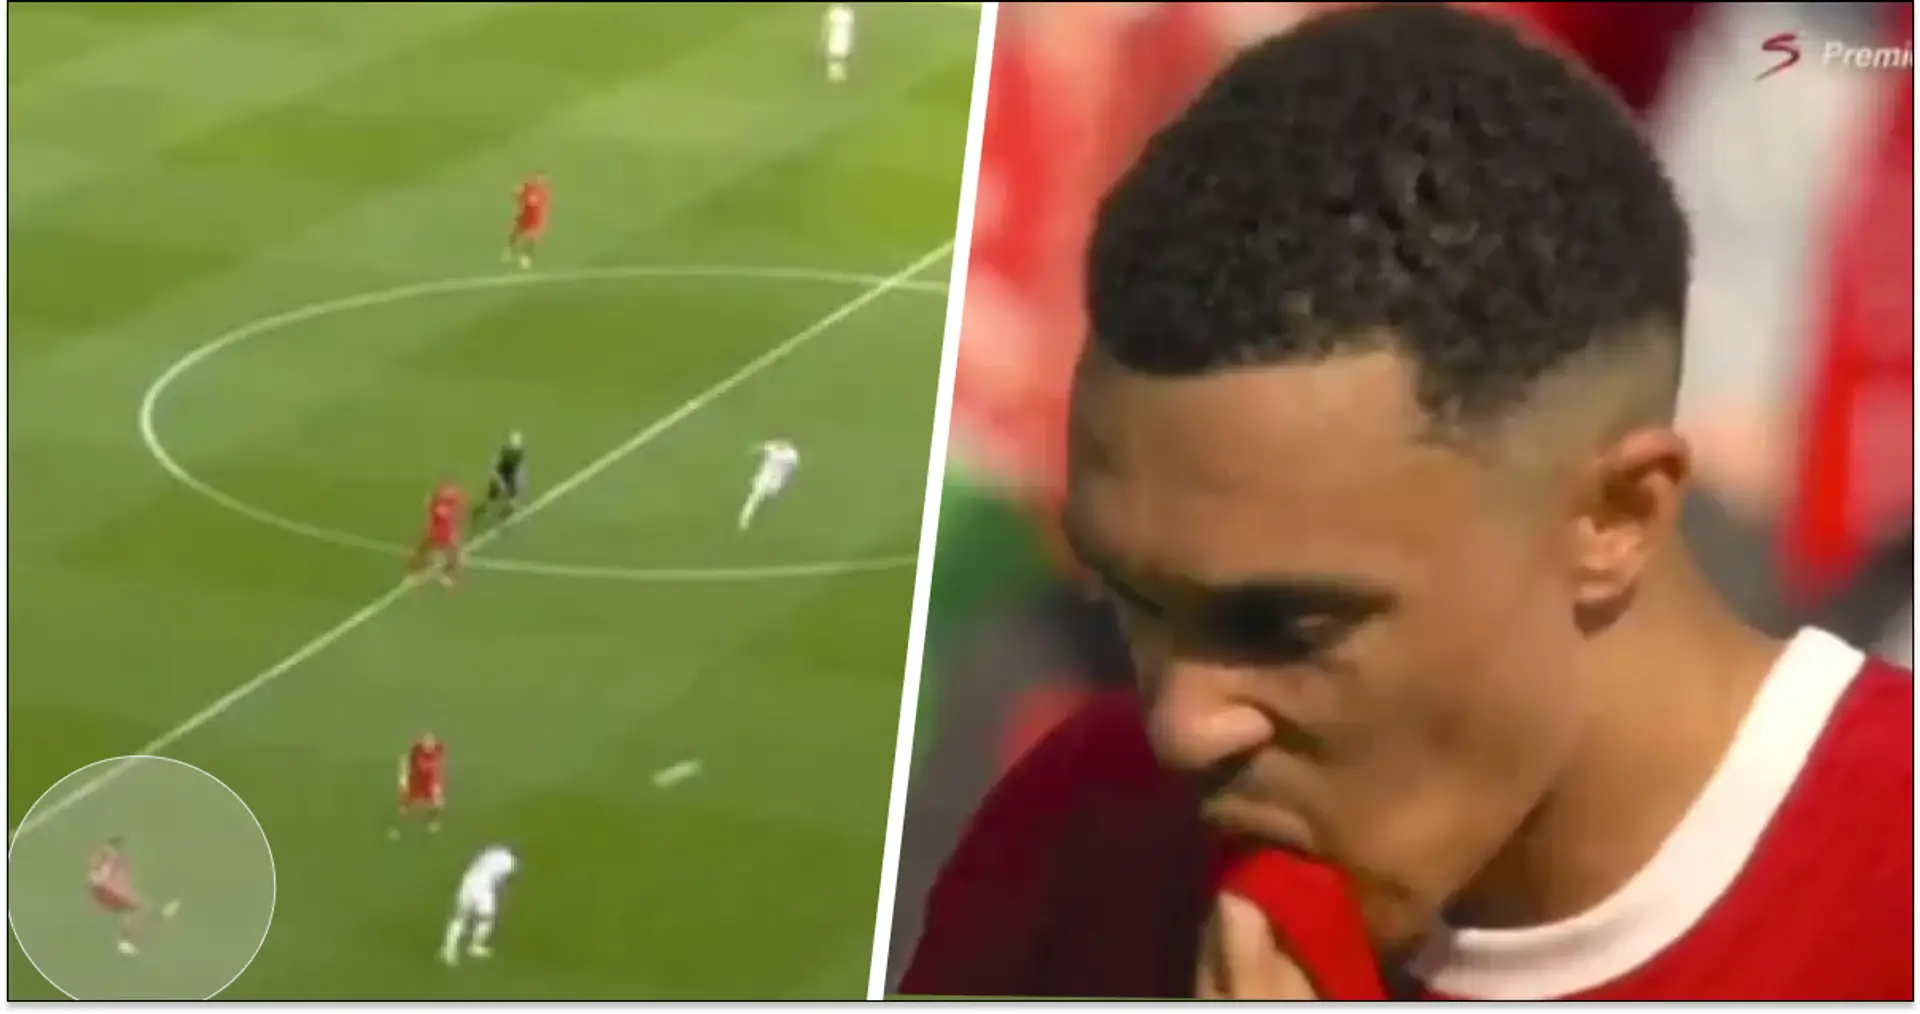 Spotted: Trent nearly scores from halfway line